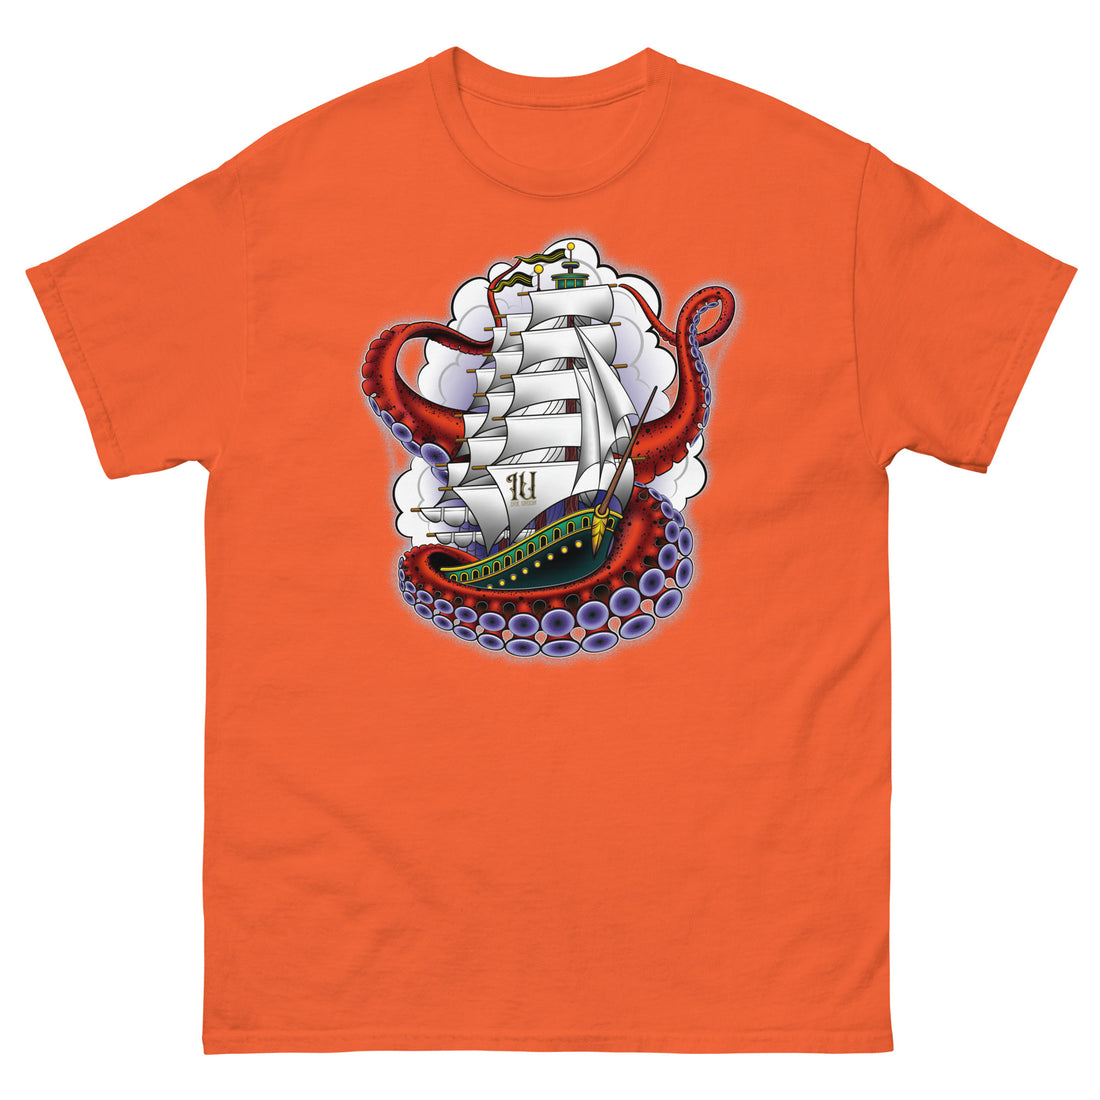 An orange t-shirt with an old-school clipper ship tattoo design in green and brown with white sails surrounded by octopus tentacles in shades of red with purple tentacles. Behind the ship are purple-tinged clouds.